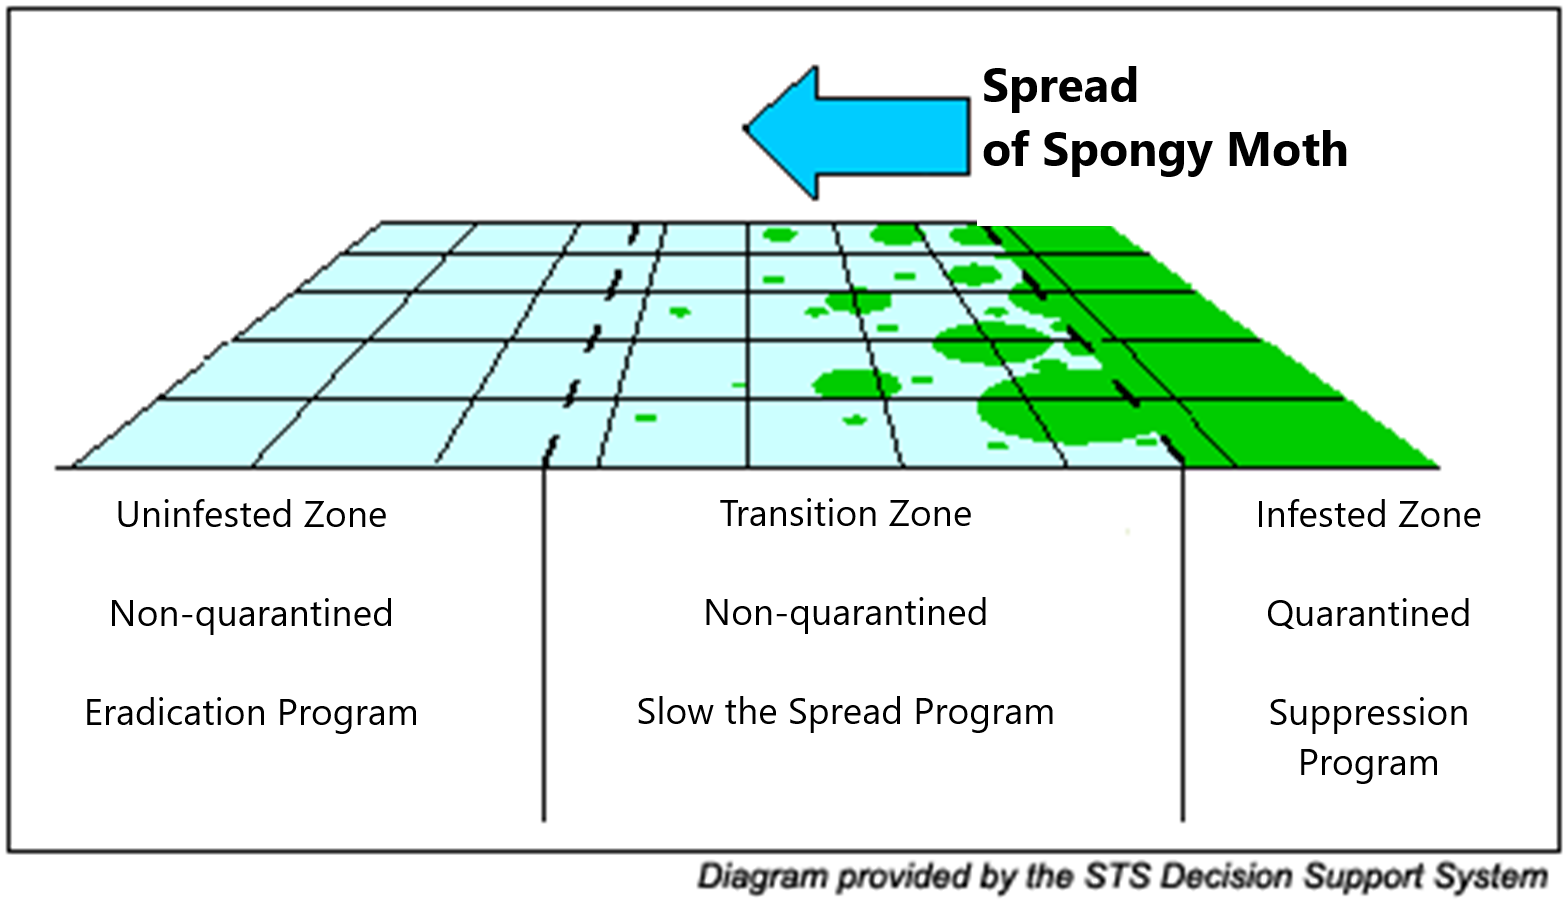 Diagram depicting the infested zone, transition zone, and uninfested zone of spongy moth spread